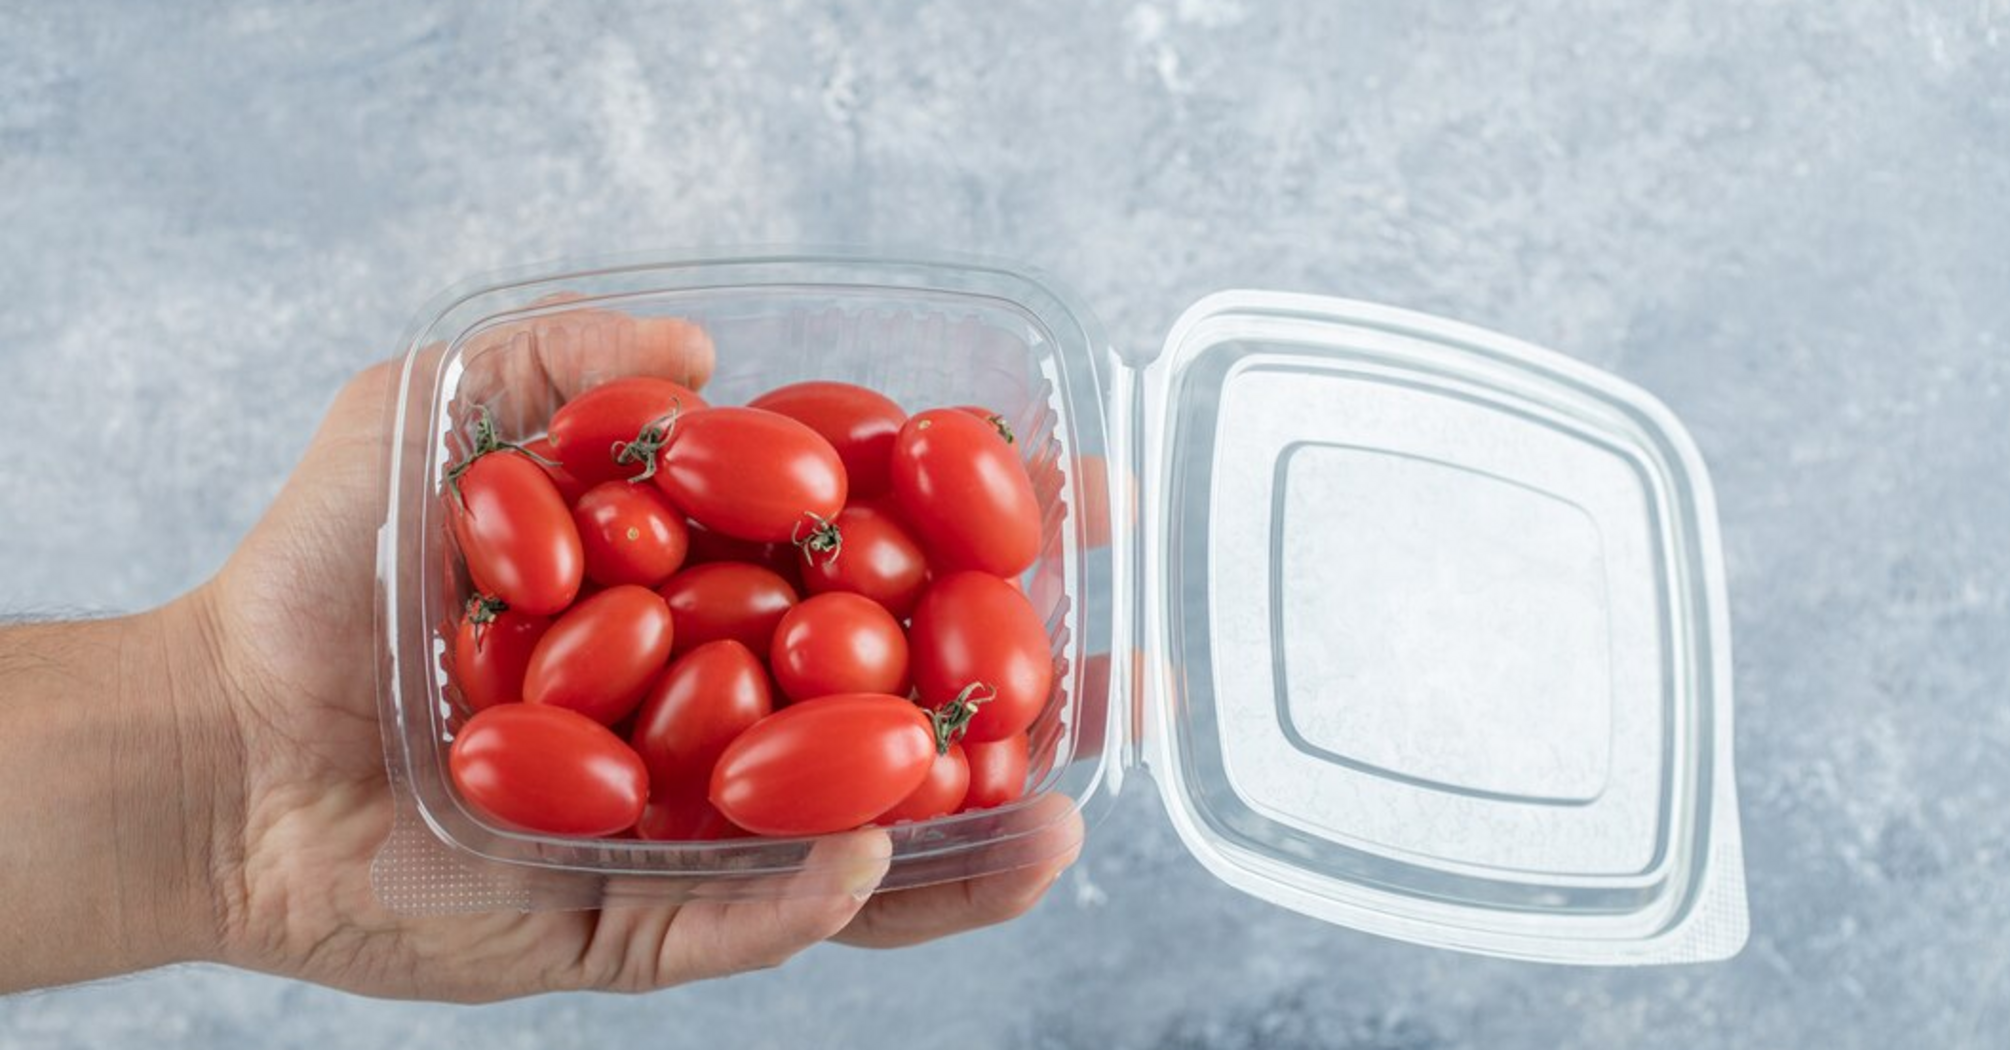 How to reuse plastic containers for fruits and vegetables: an original idea